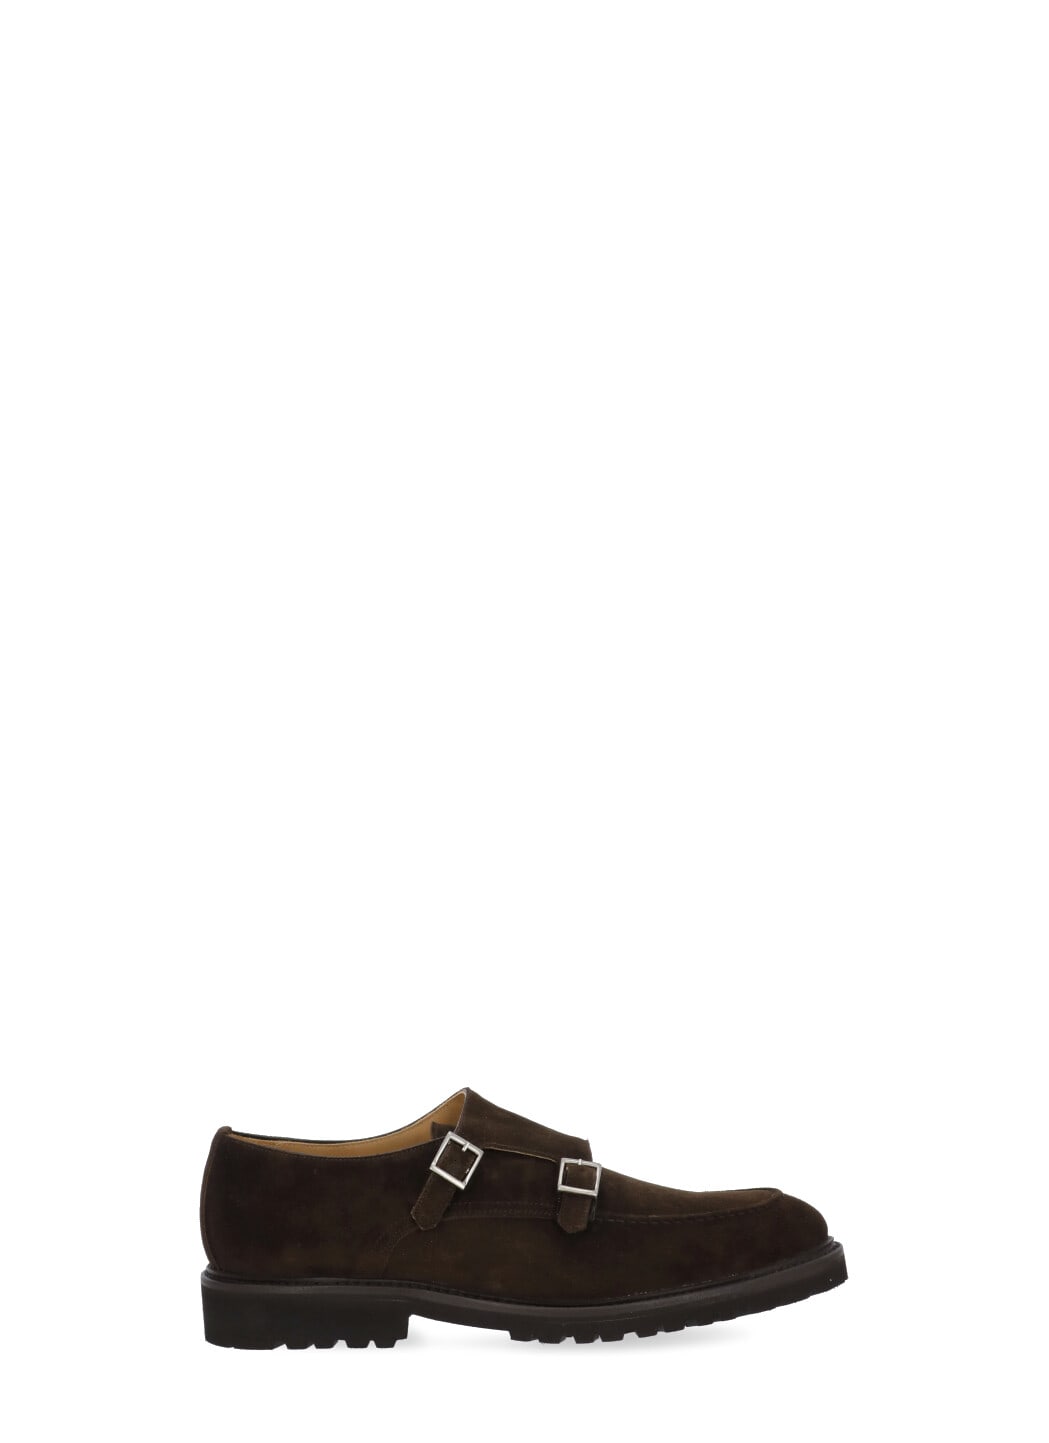 Berwick 1707 Suede Leather Loafers